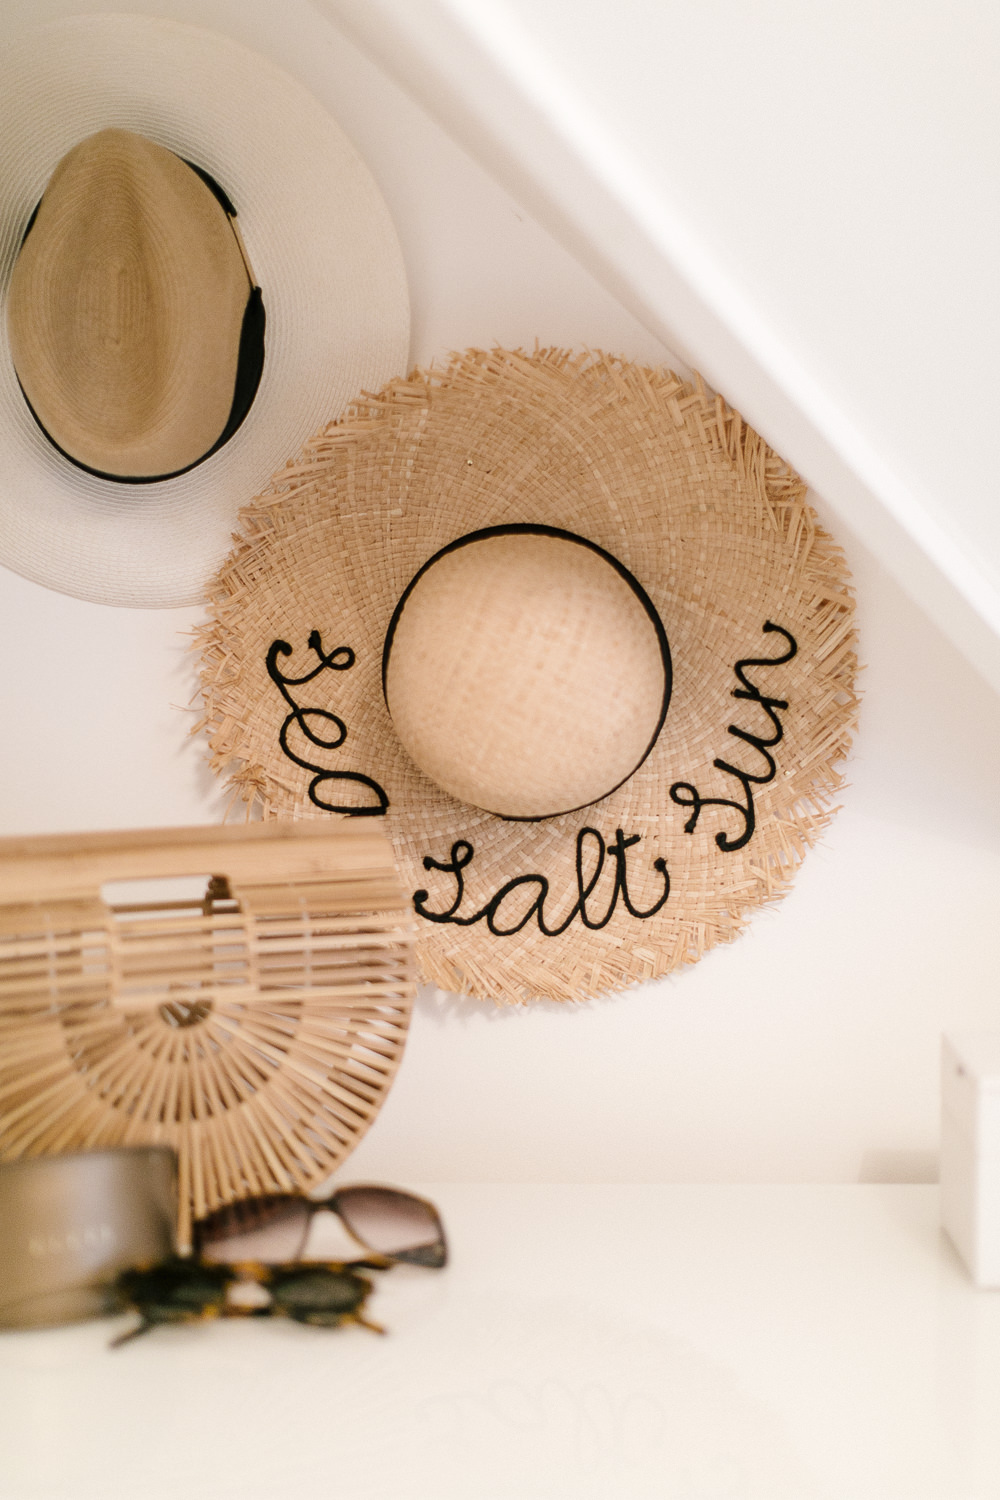 How to Display Hats as a Feature Wall | Straw Hat Wall